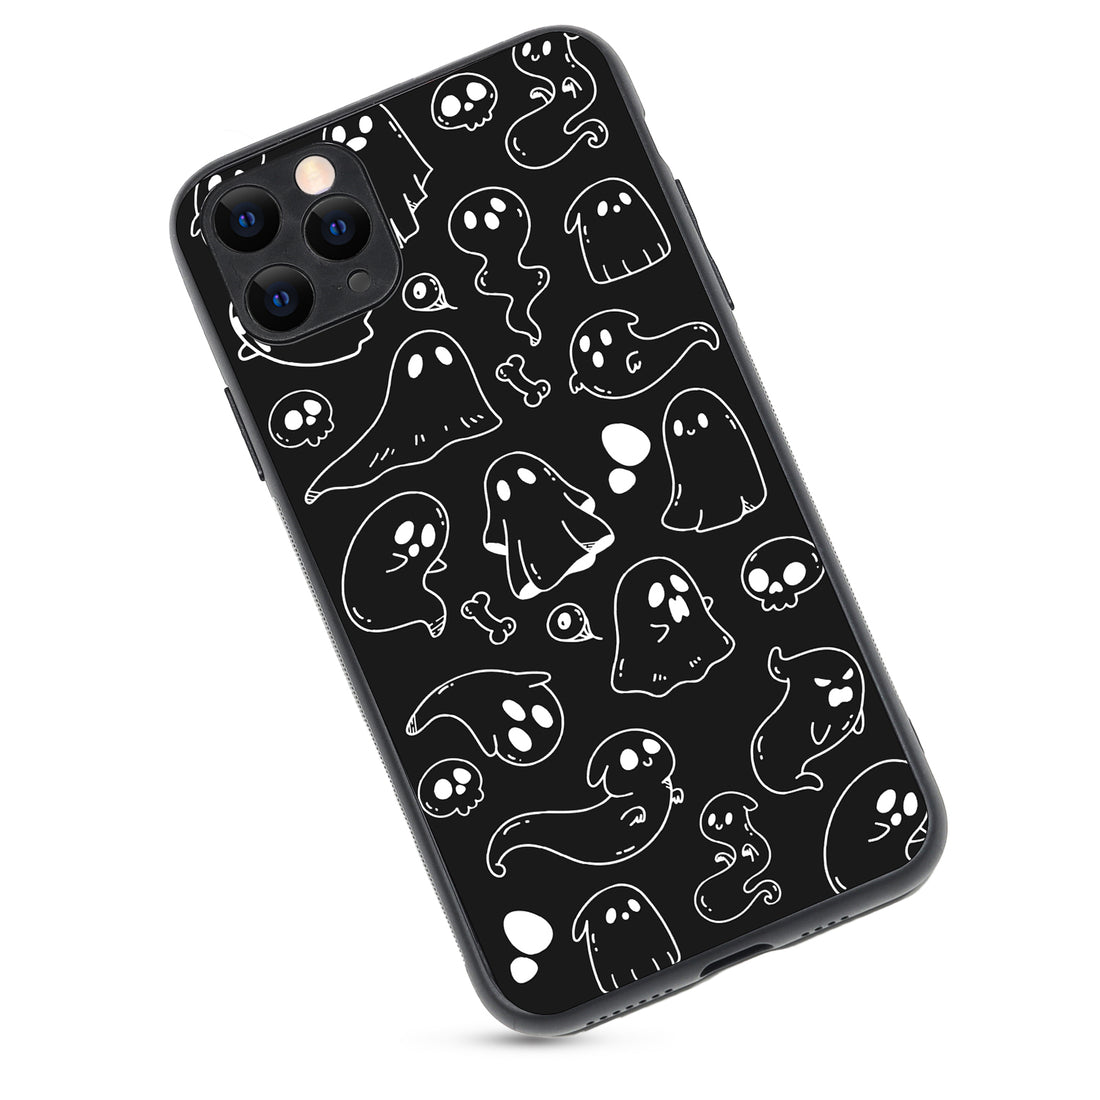 Black Ghost Doodle iPhone 11 Pro Max Case